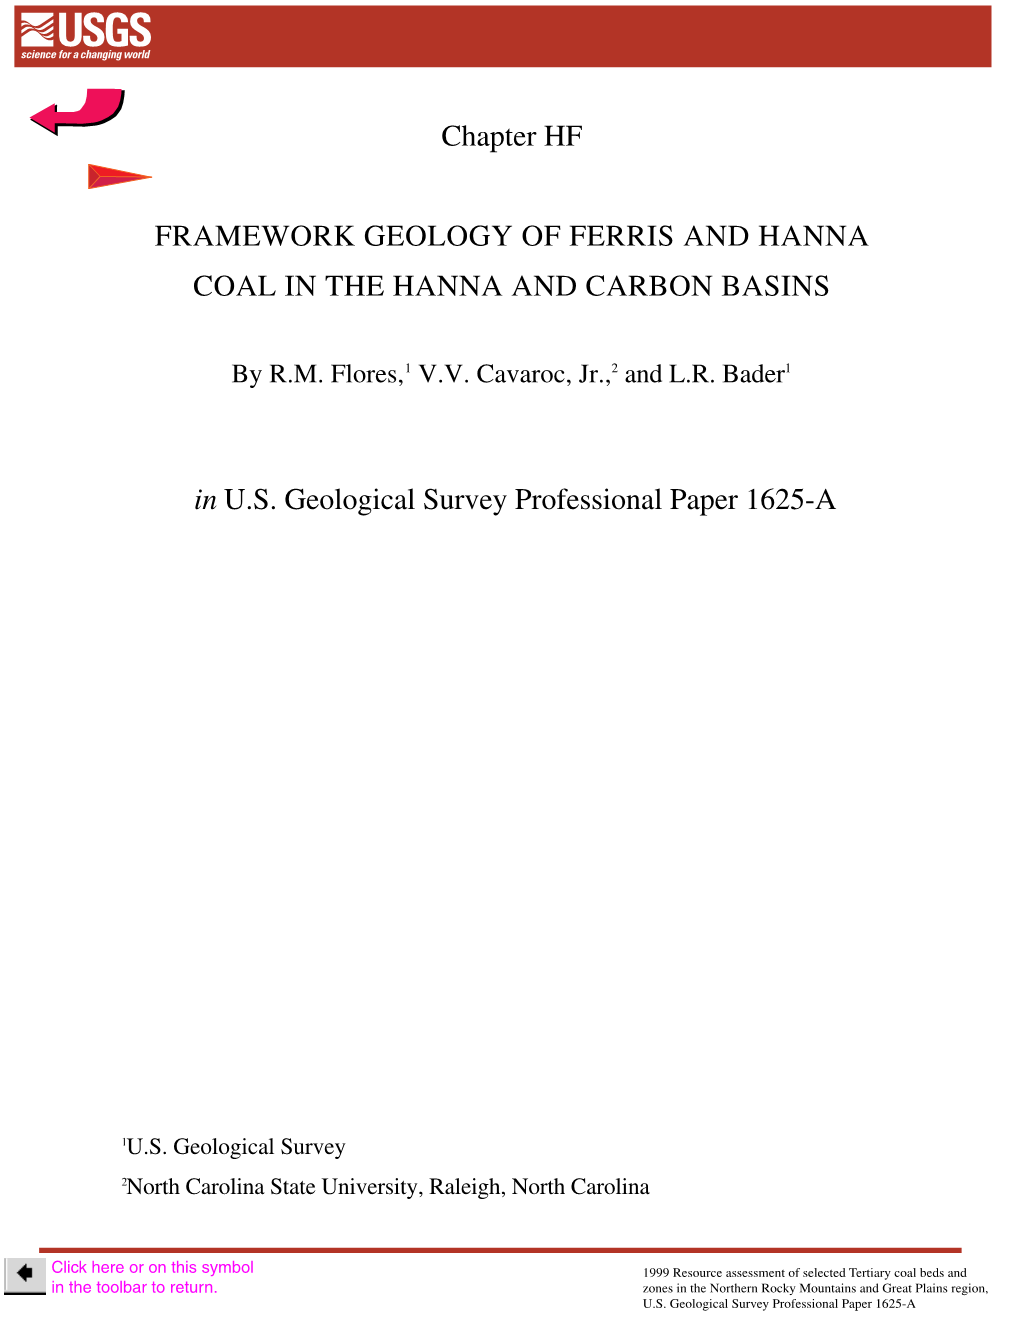 Chapter HF FRAMEWORK GEOLOGY of FERRIS and HANNA COAL IN